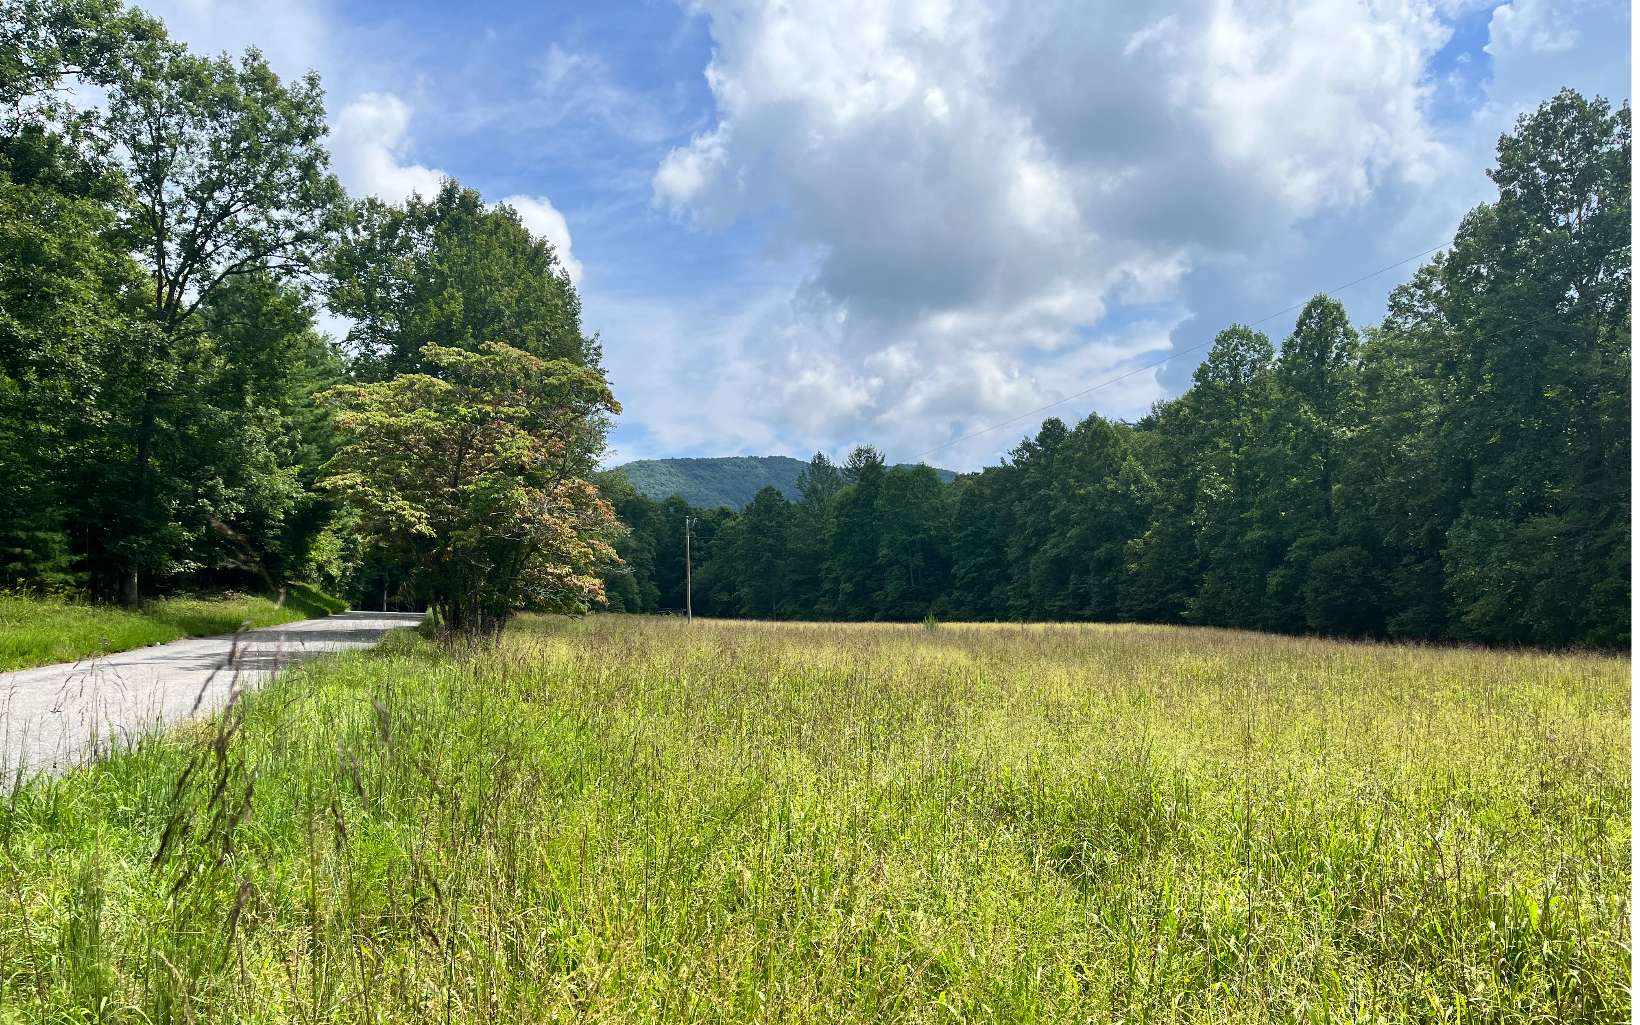 THIS PROPERTY HAS IT ALL!! **UNRESTRICTED 17.69 acres with pasture, NOISY CREEK, VIEWS and ridgeline to build your dream home. Under 10 miles from Blairsville or Murphy NC. Overhead power on property. County water ends approx. 200 ft from acreage.